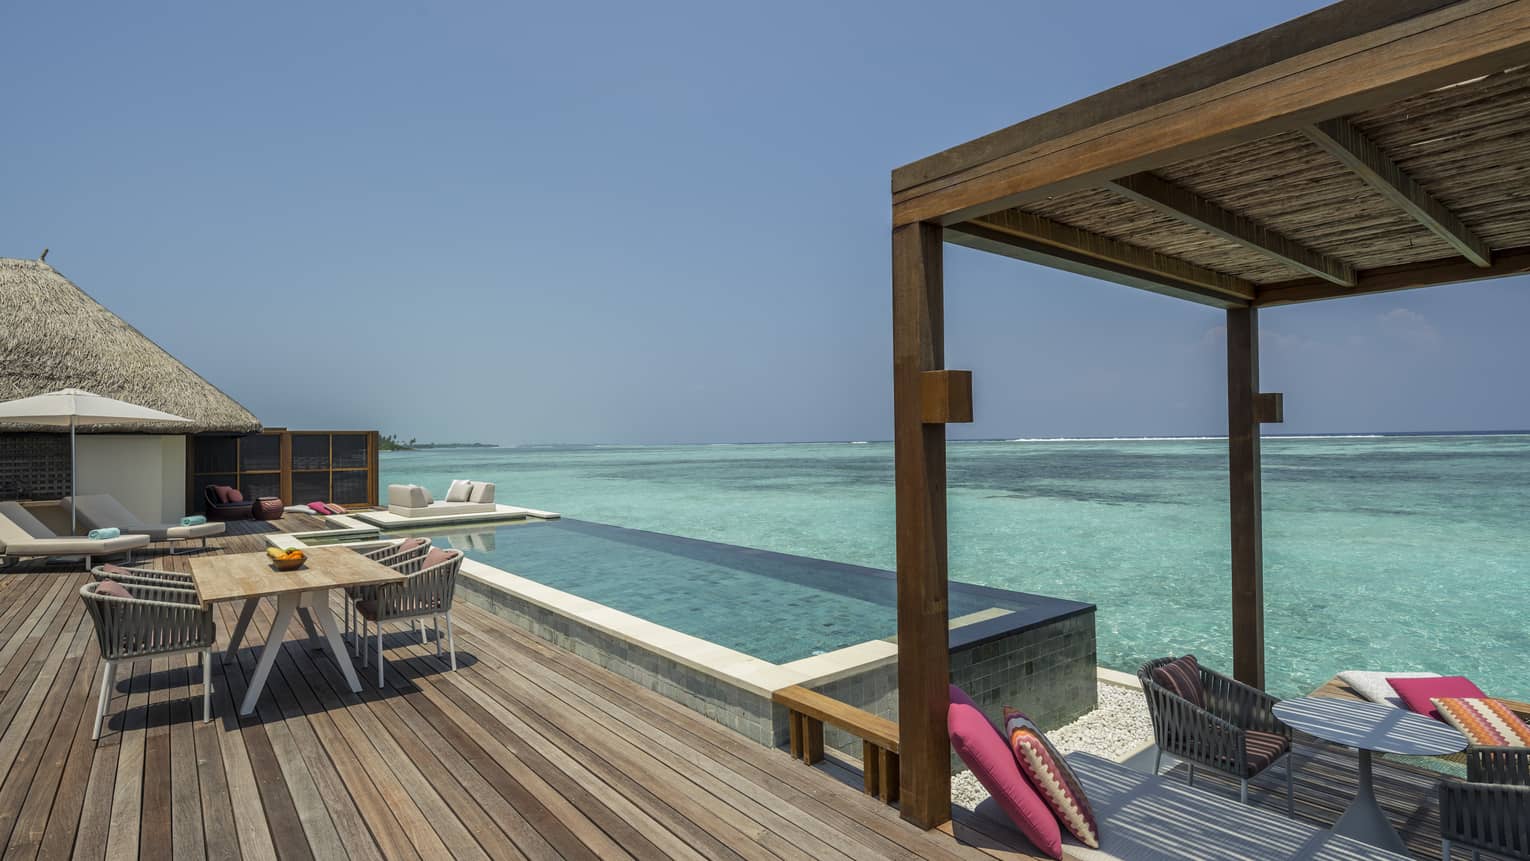 Large wooden deck with dining table and infinity pool overlooking clear turquoise water